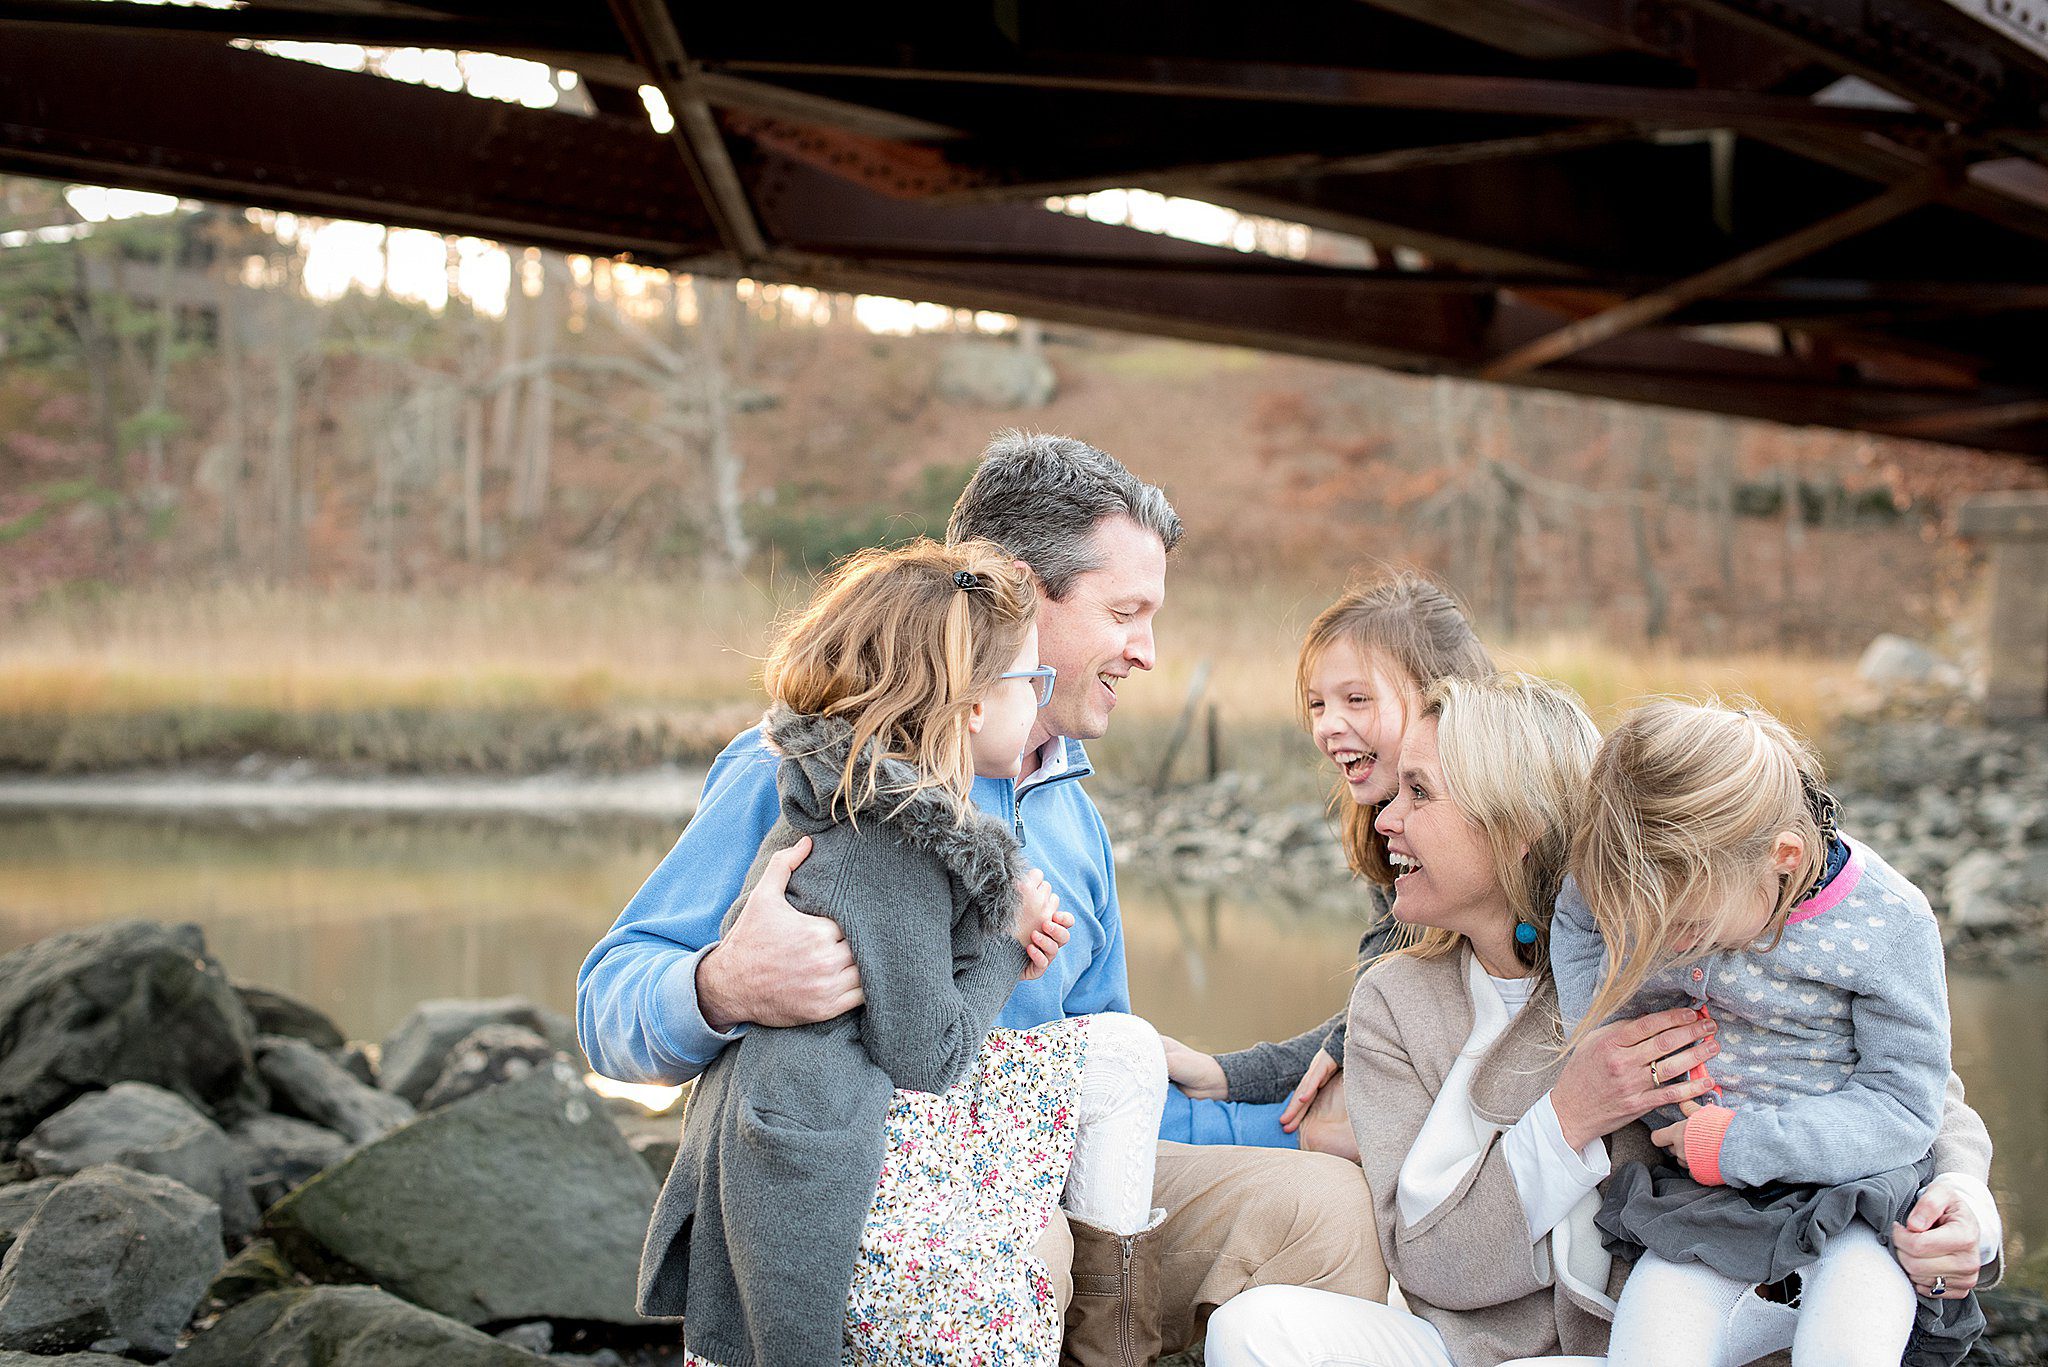 A family of five with three young daughter laughs and plays on rocks along a river under a bridge